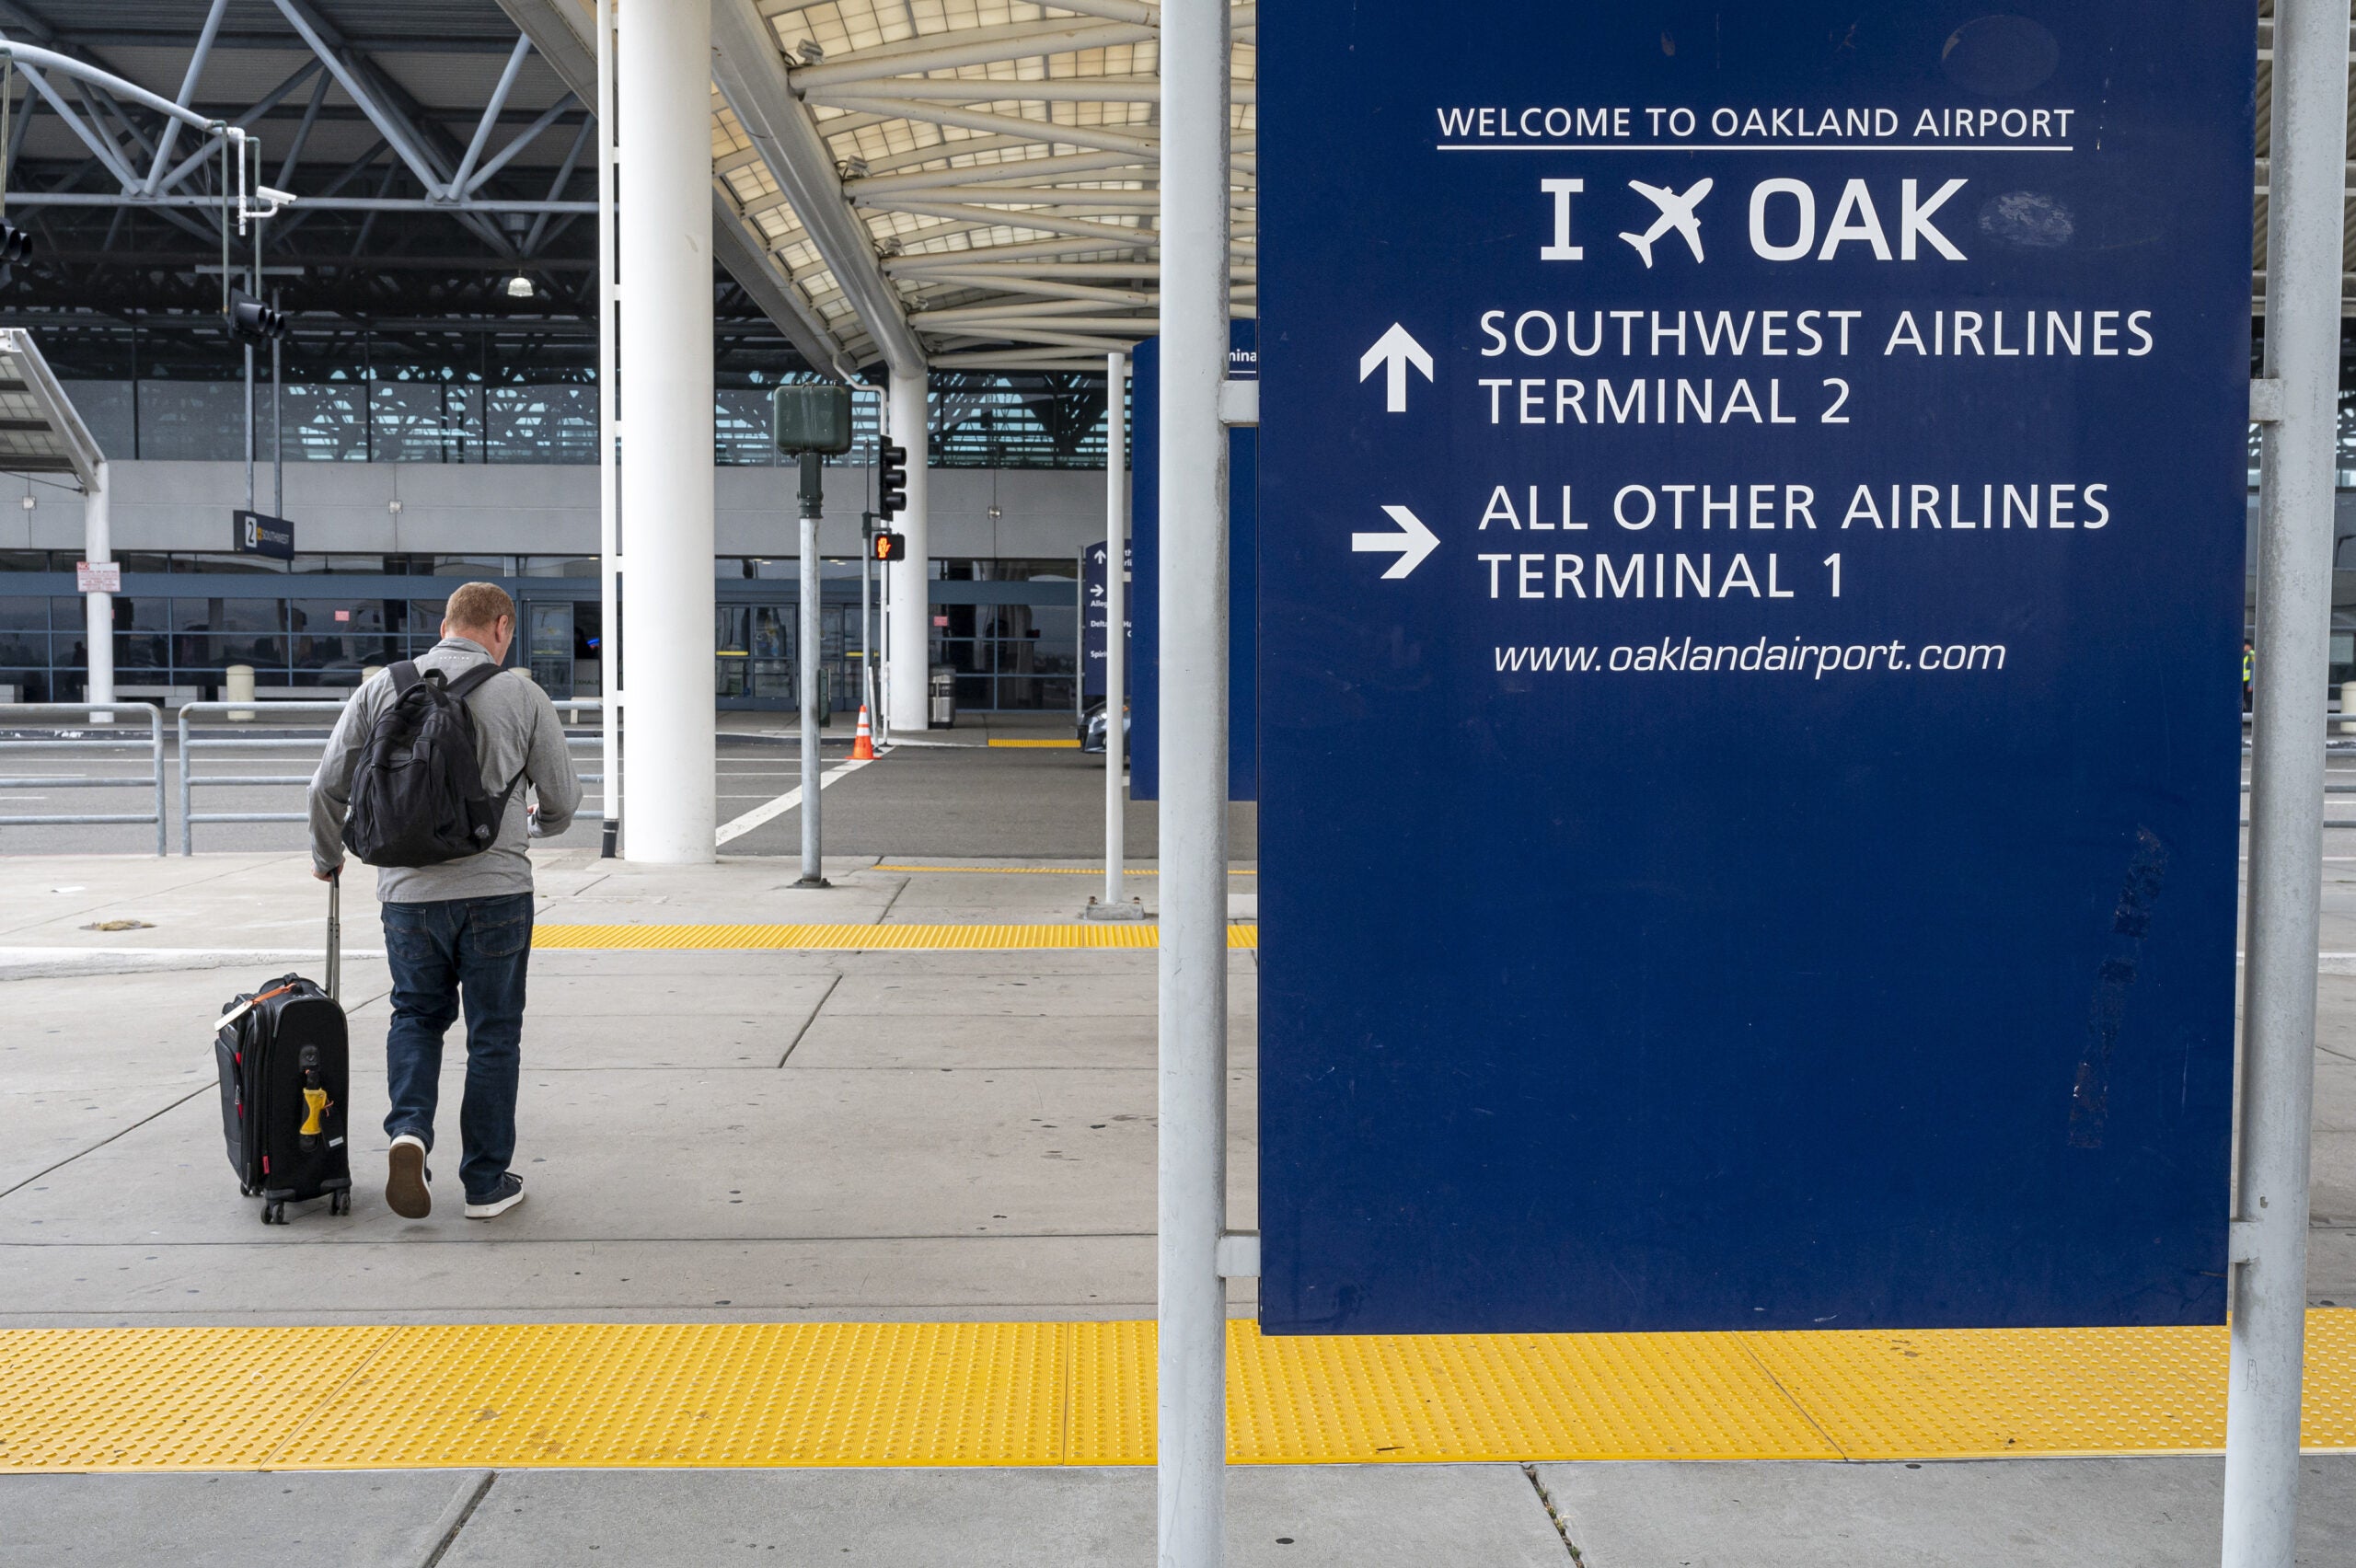 Oakland’s airport officially changes name to San Francisco Bay Oakland International Airport